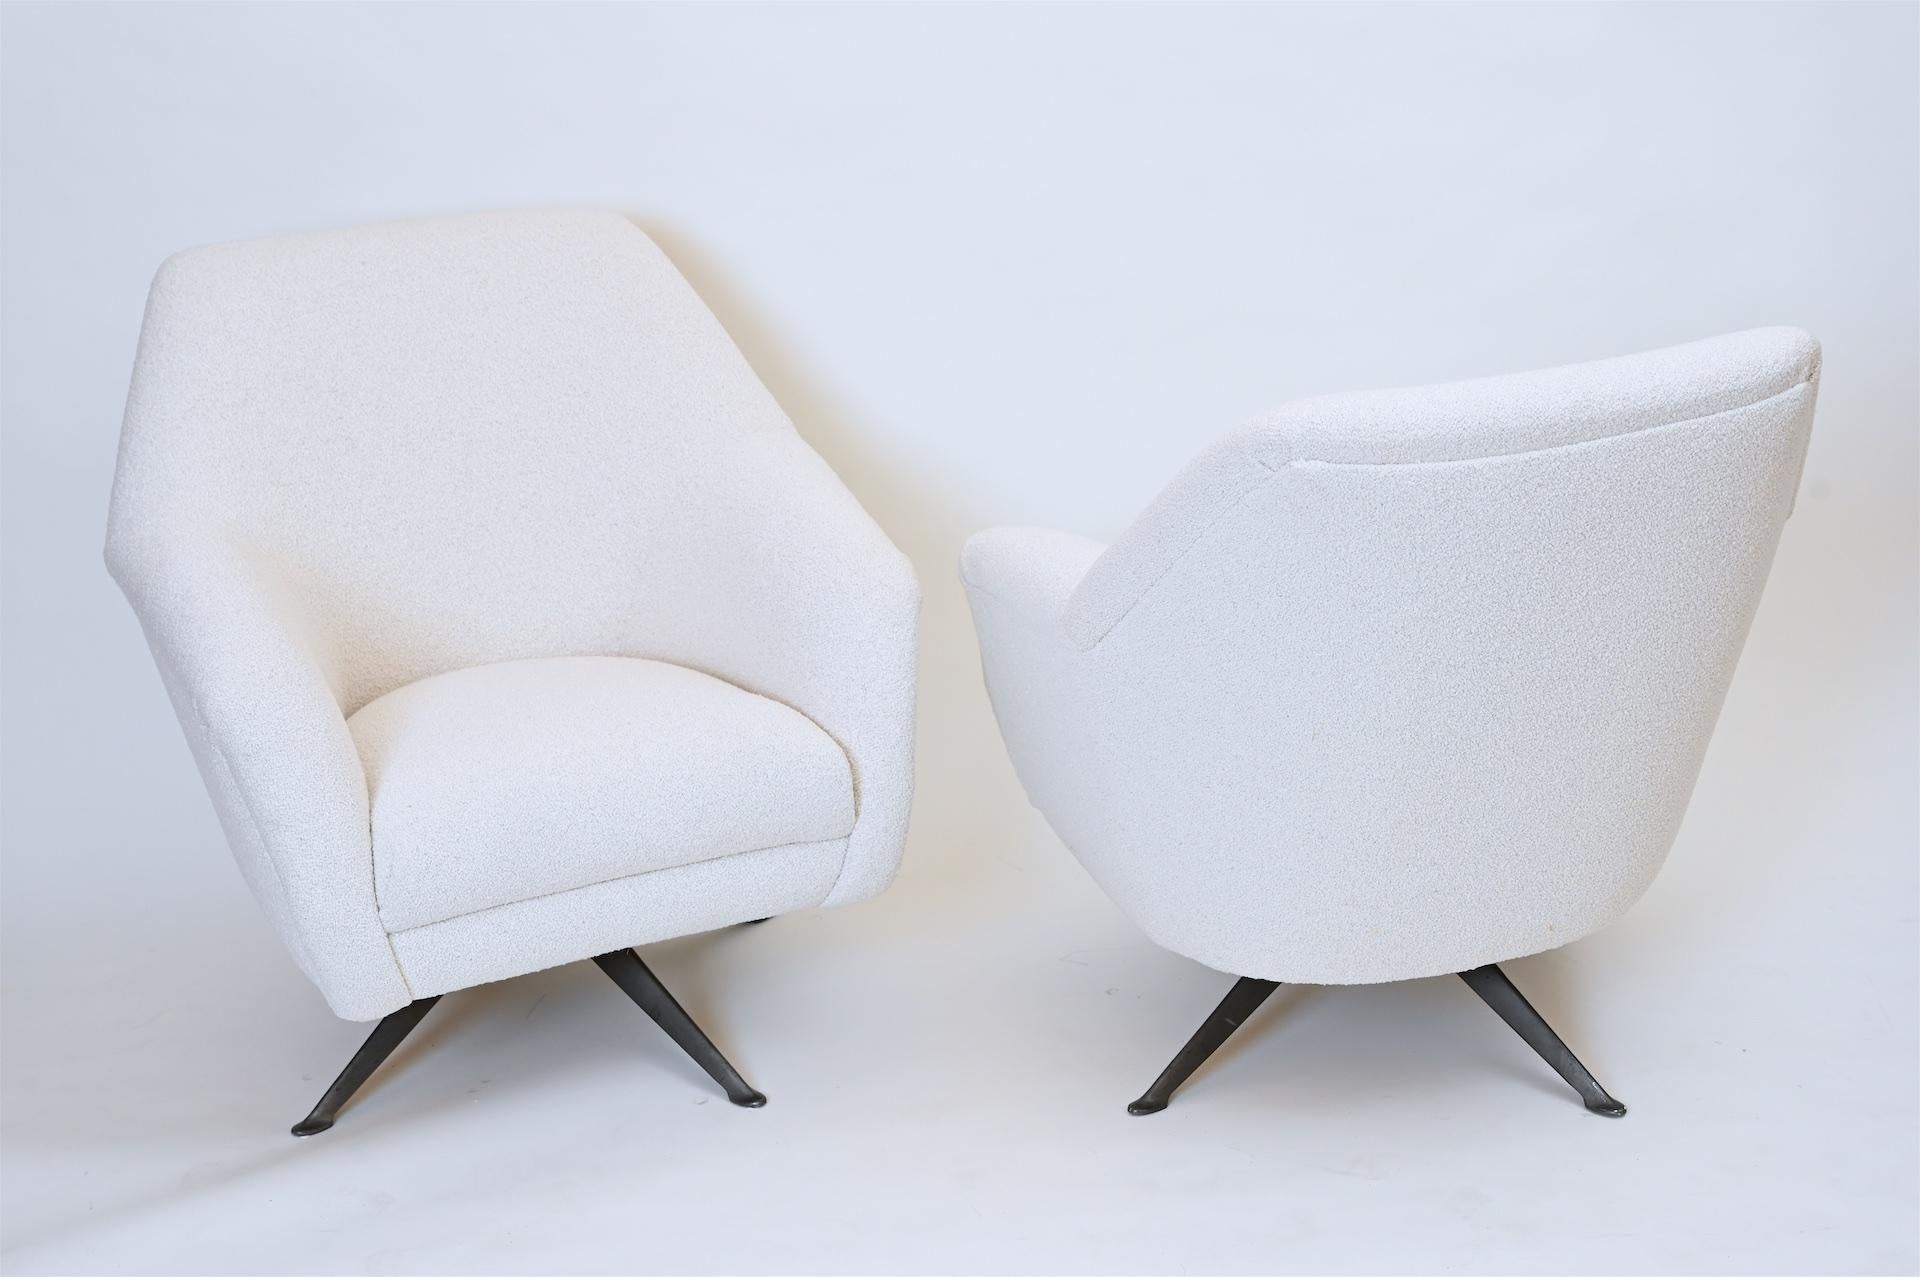 These are original and rare 1950s Borsani chairs. 

A design Classic. 

These have been reupholstered in a cotton white boucle

Prada has recently commissioned a re-edited model for their stores.
  